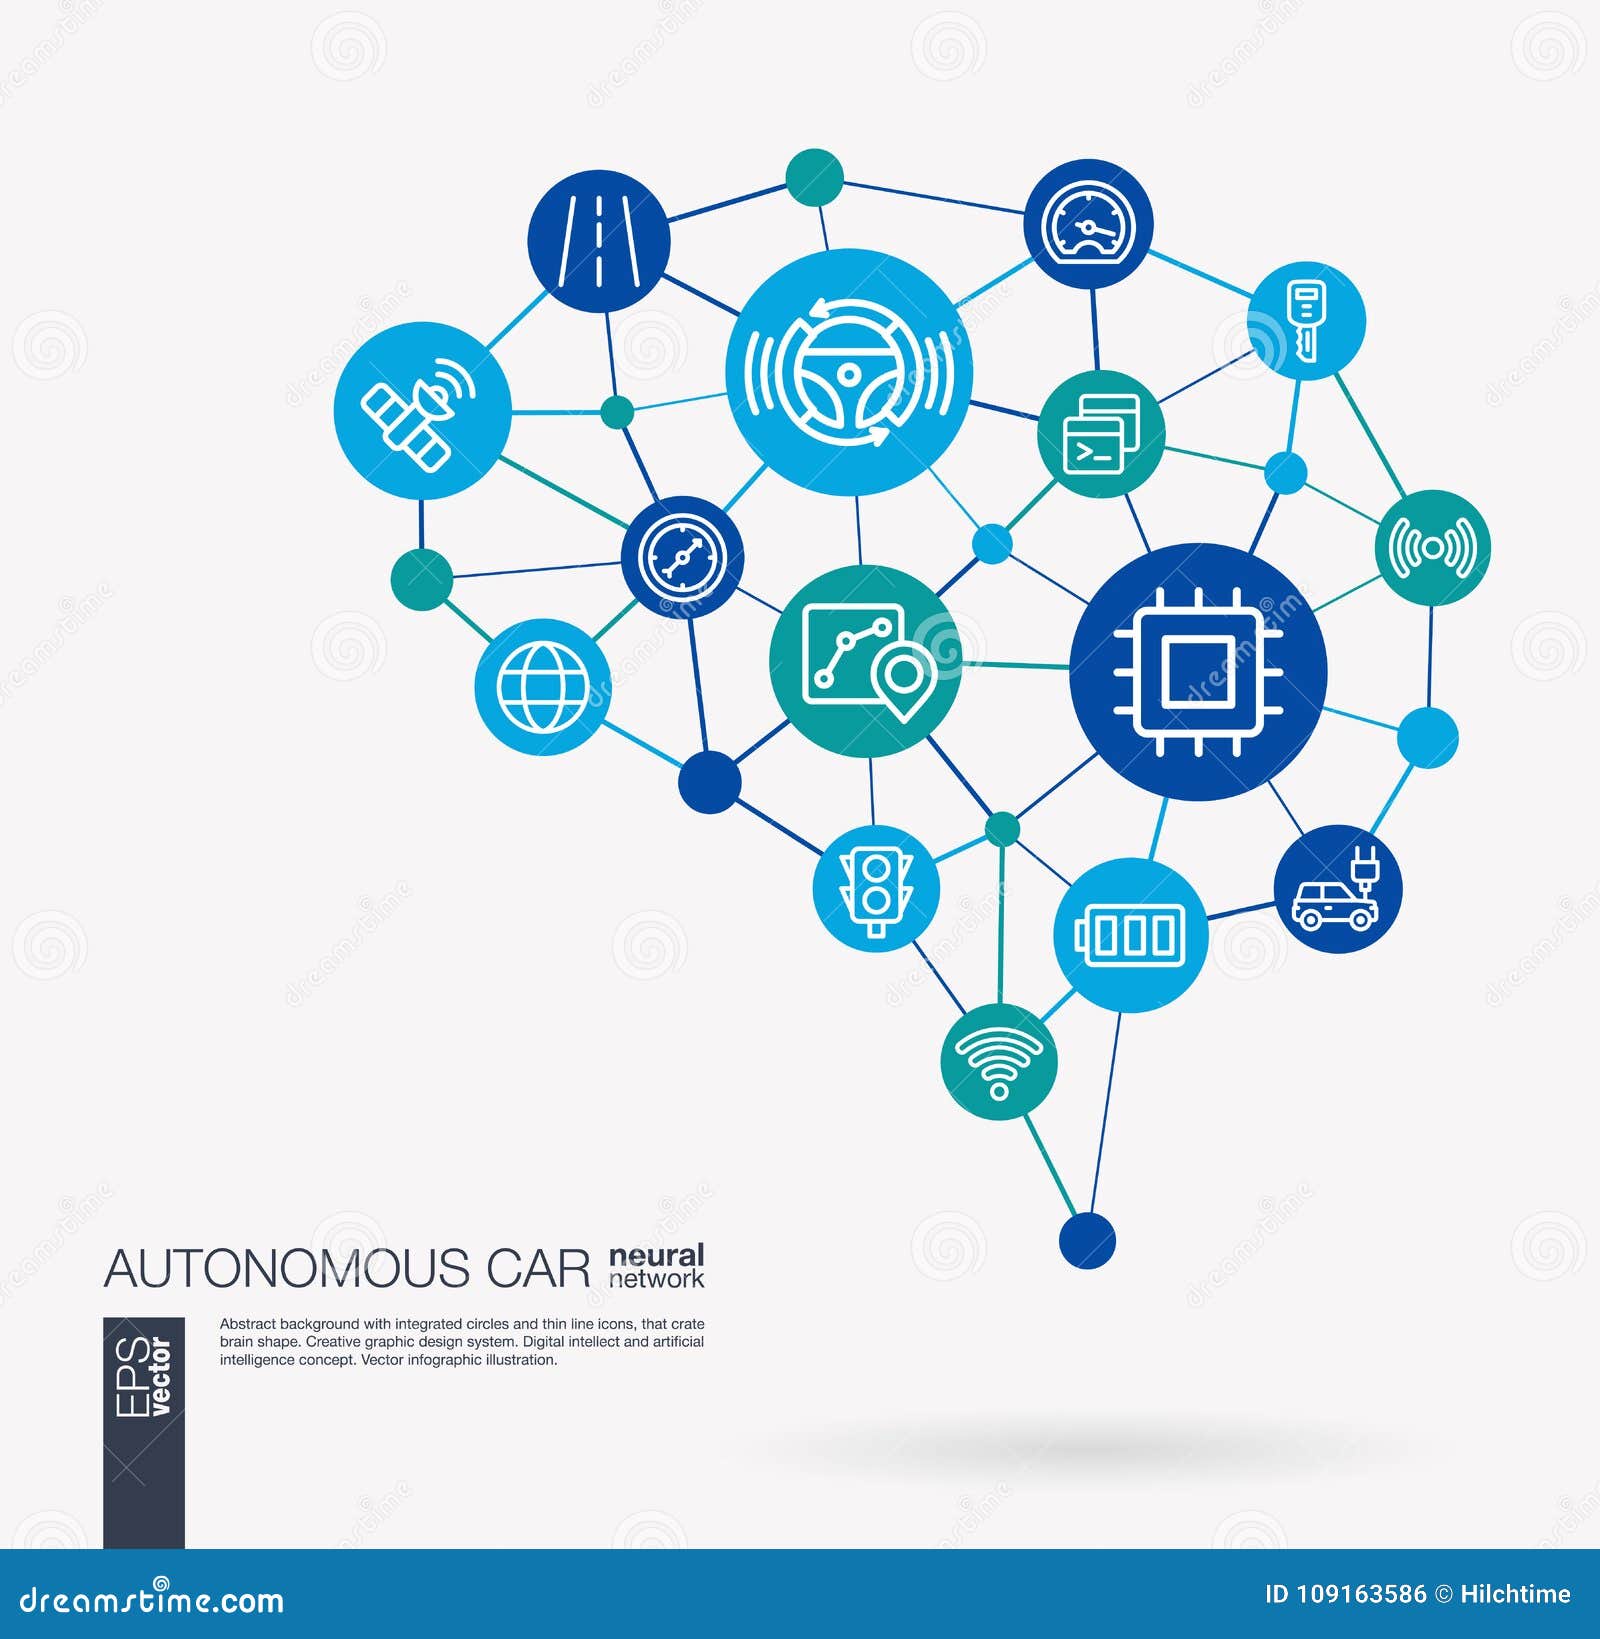 Challenges and solutions in integrating AI and Autonomous Driving into Electric Vehicles